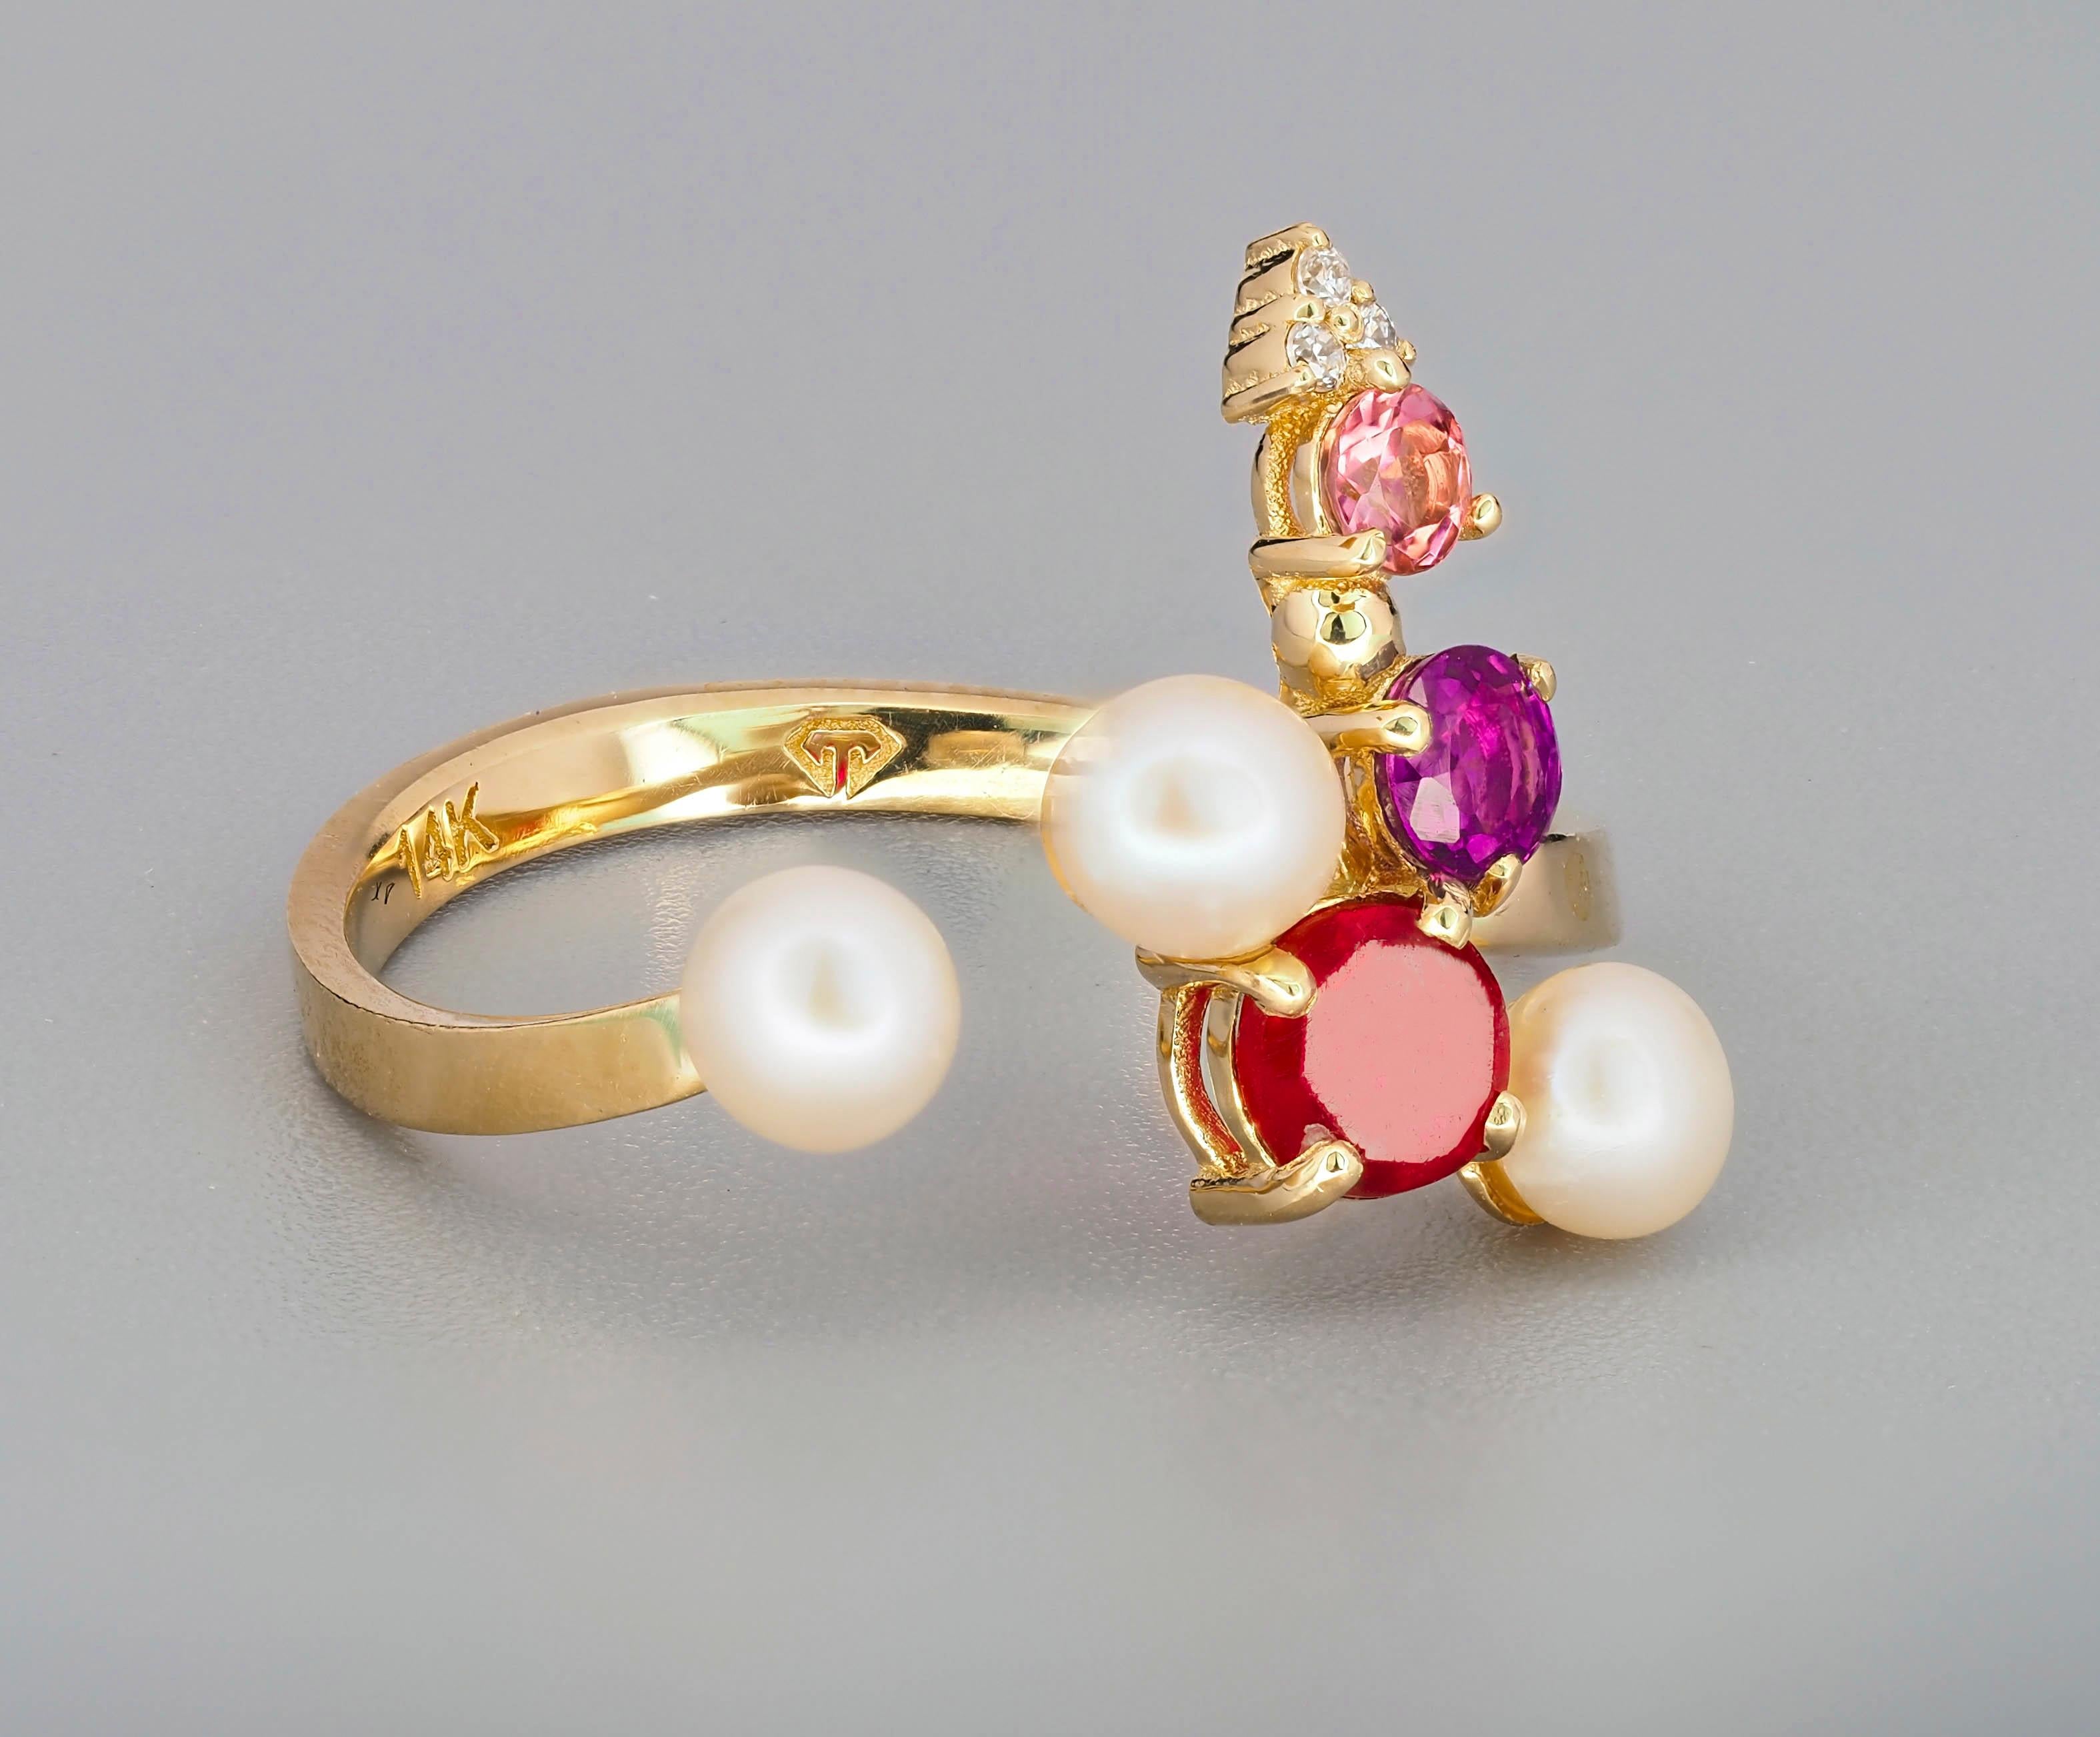 For Sale:   Ruby and multicolored gemstones ring in 14k gold! 4